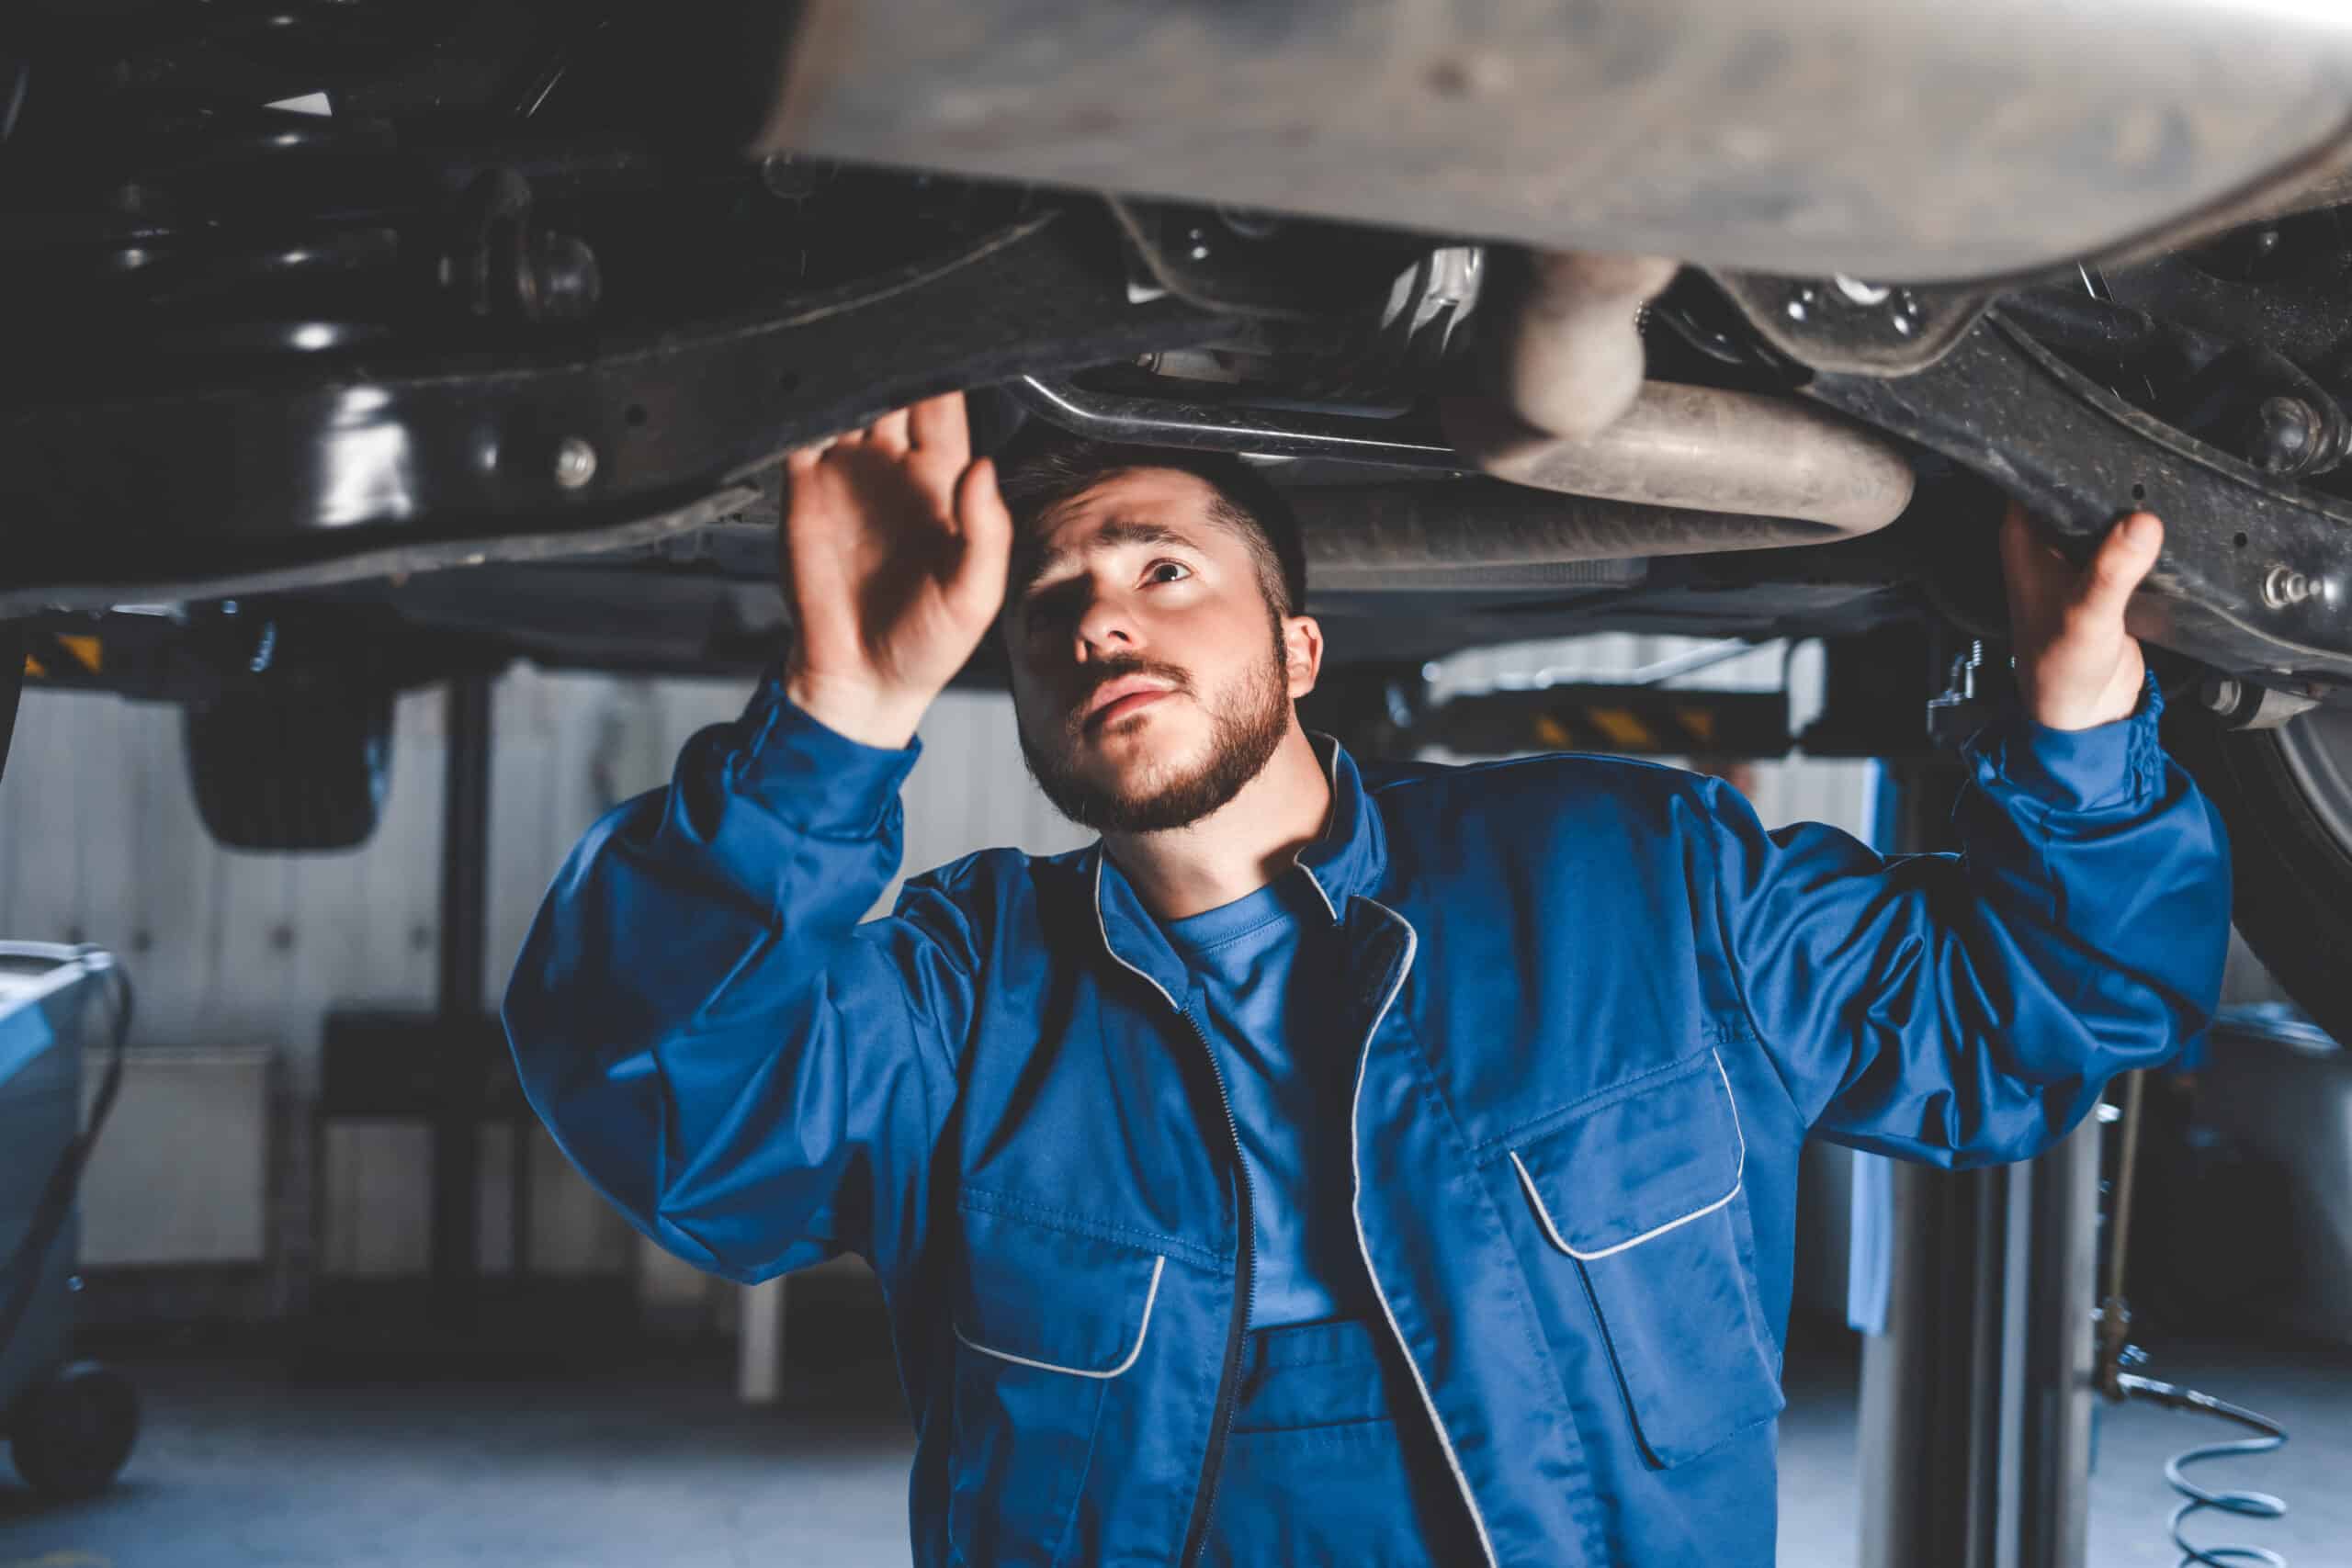 An auto mechanic examines the steering and suspension of a car during a thorough inspection.